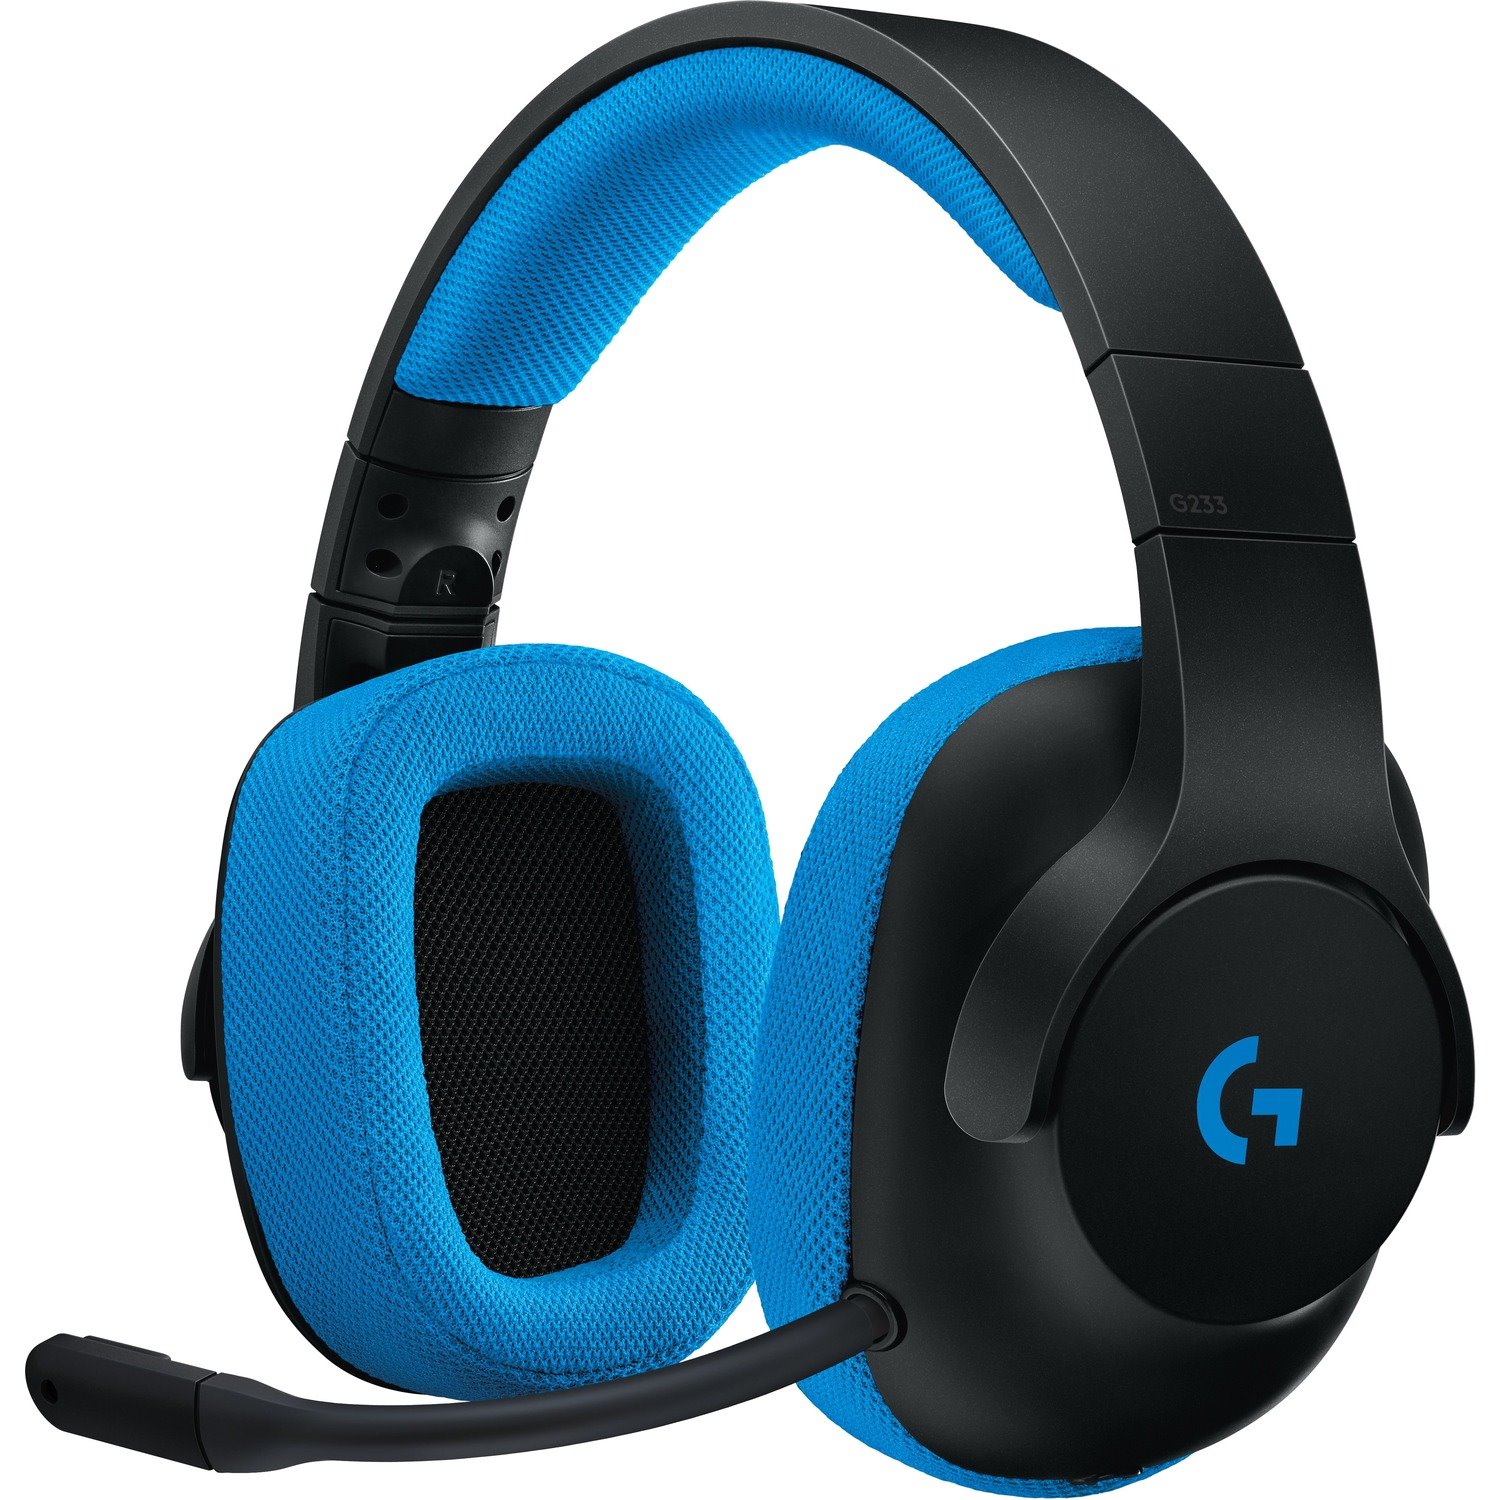 Logitech Prodigy G233 Wired Over-the-head Stereo Gaming Headset